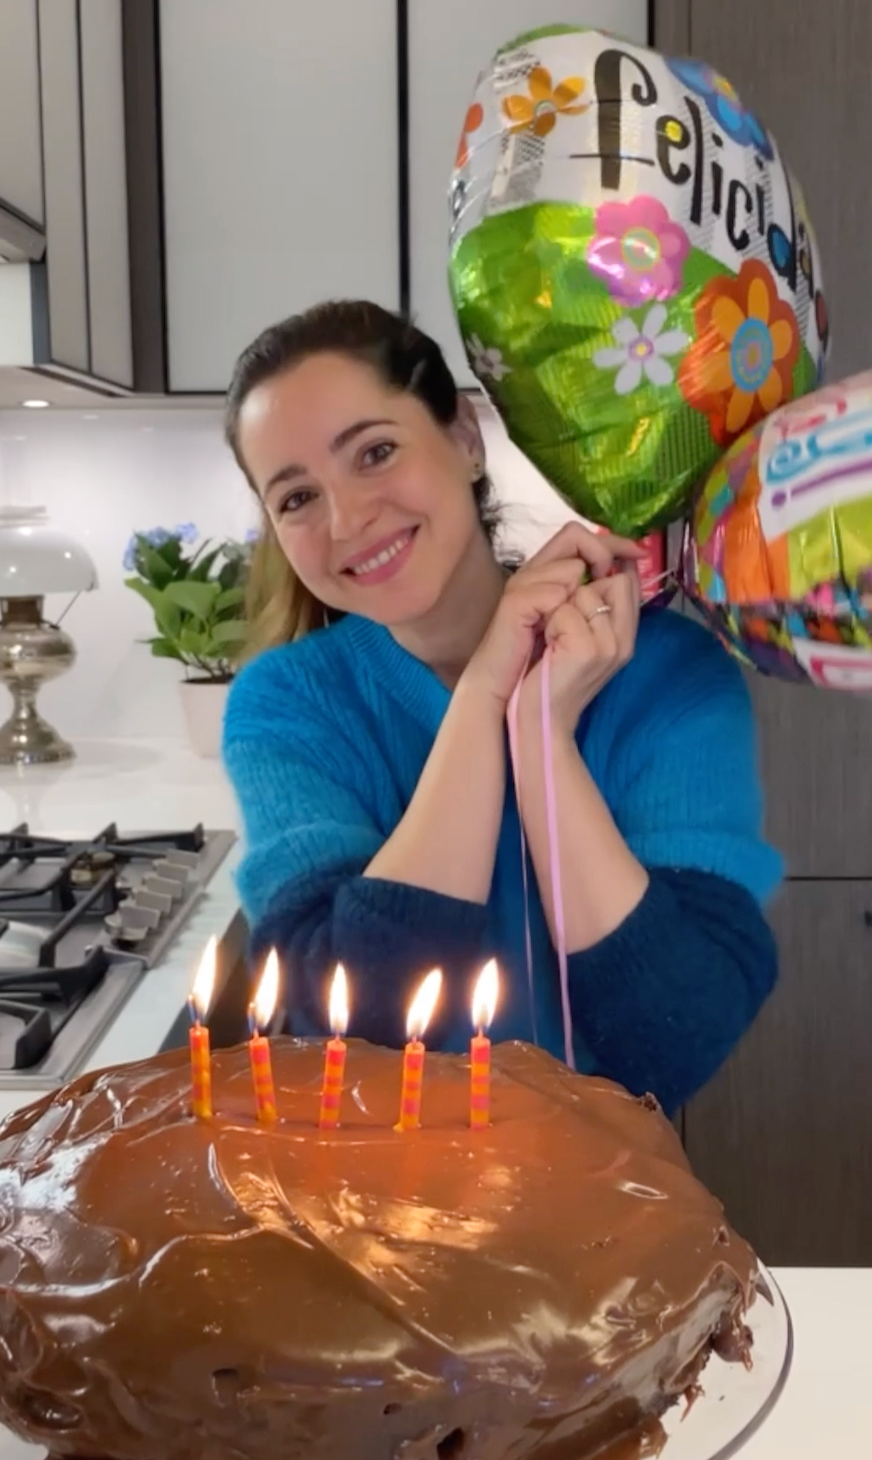 woman in kitchen holding birthday balloons and smiling with a birthday cake in front of her with 5 candles